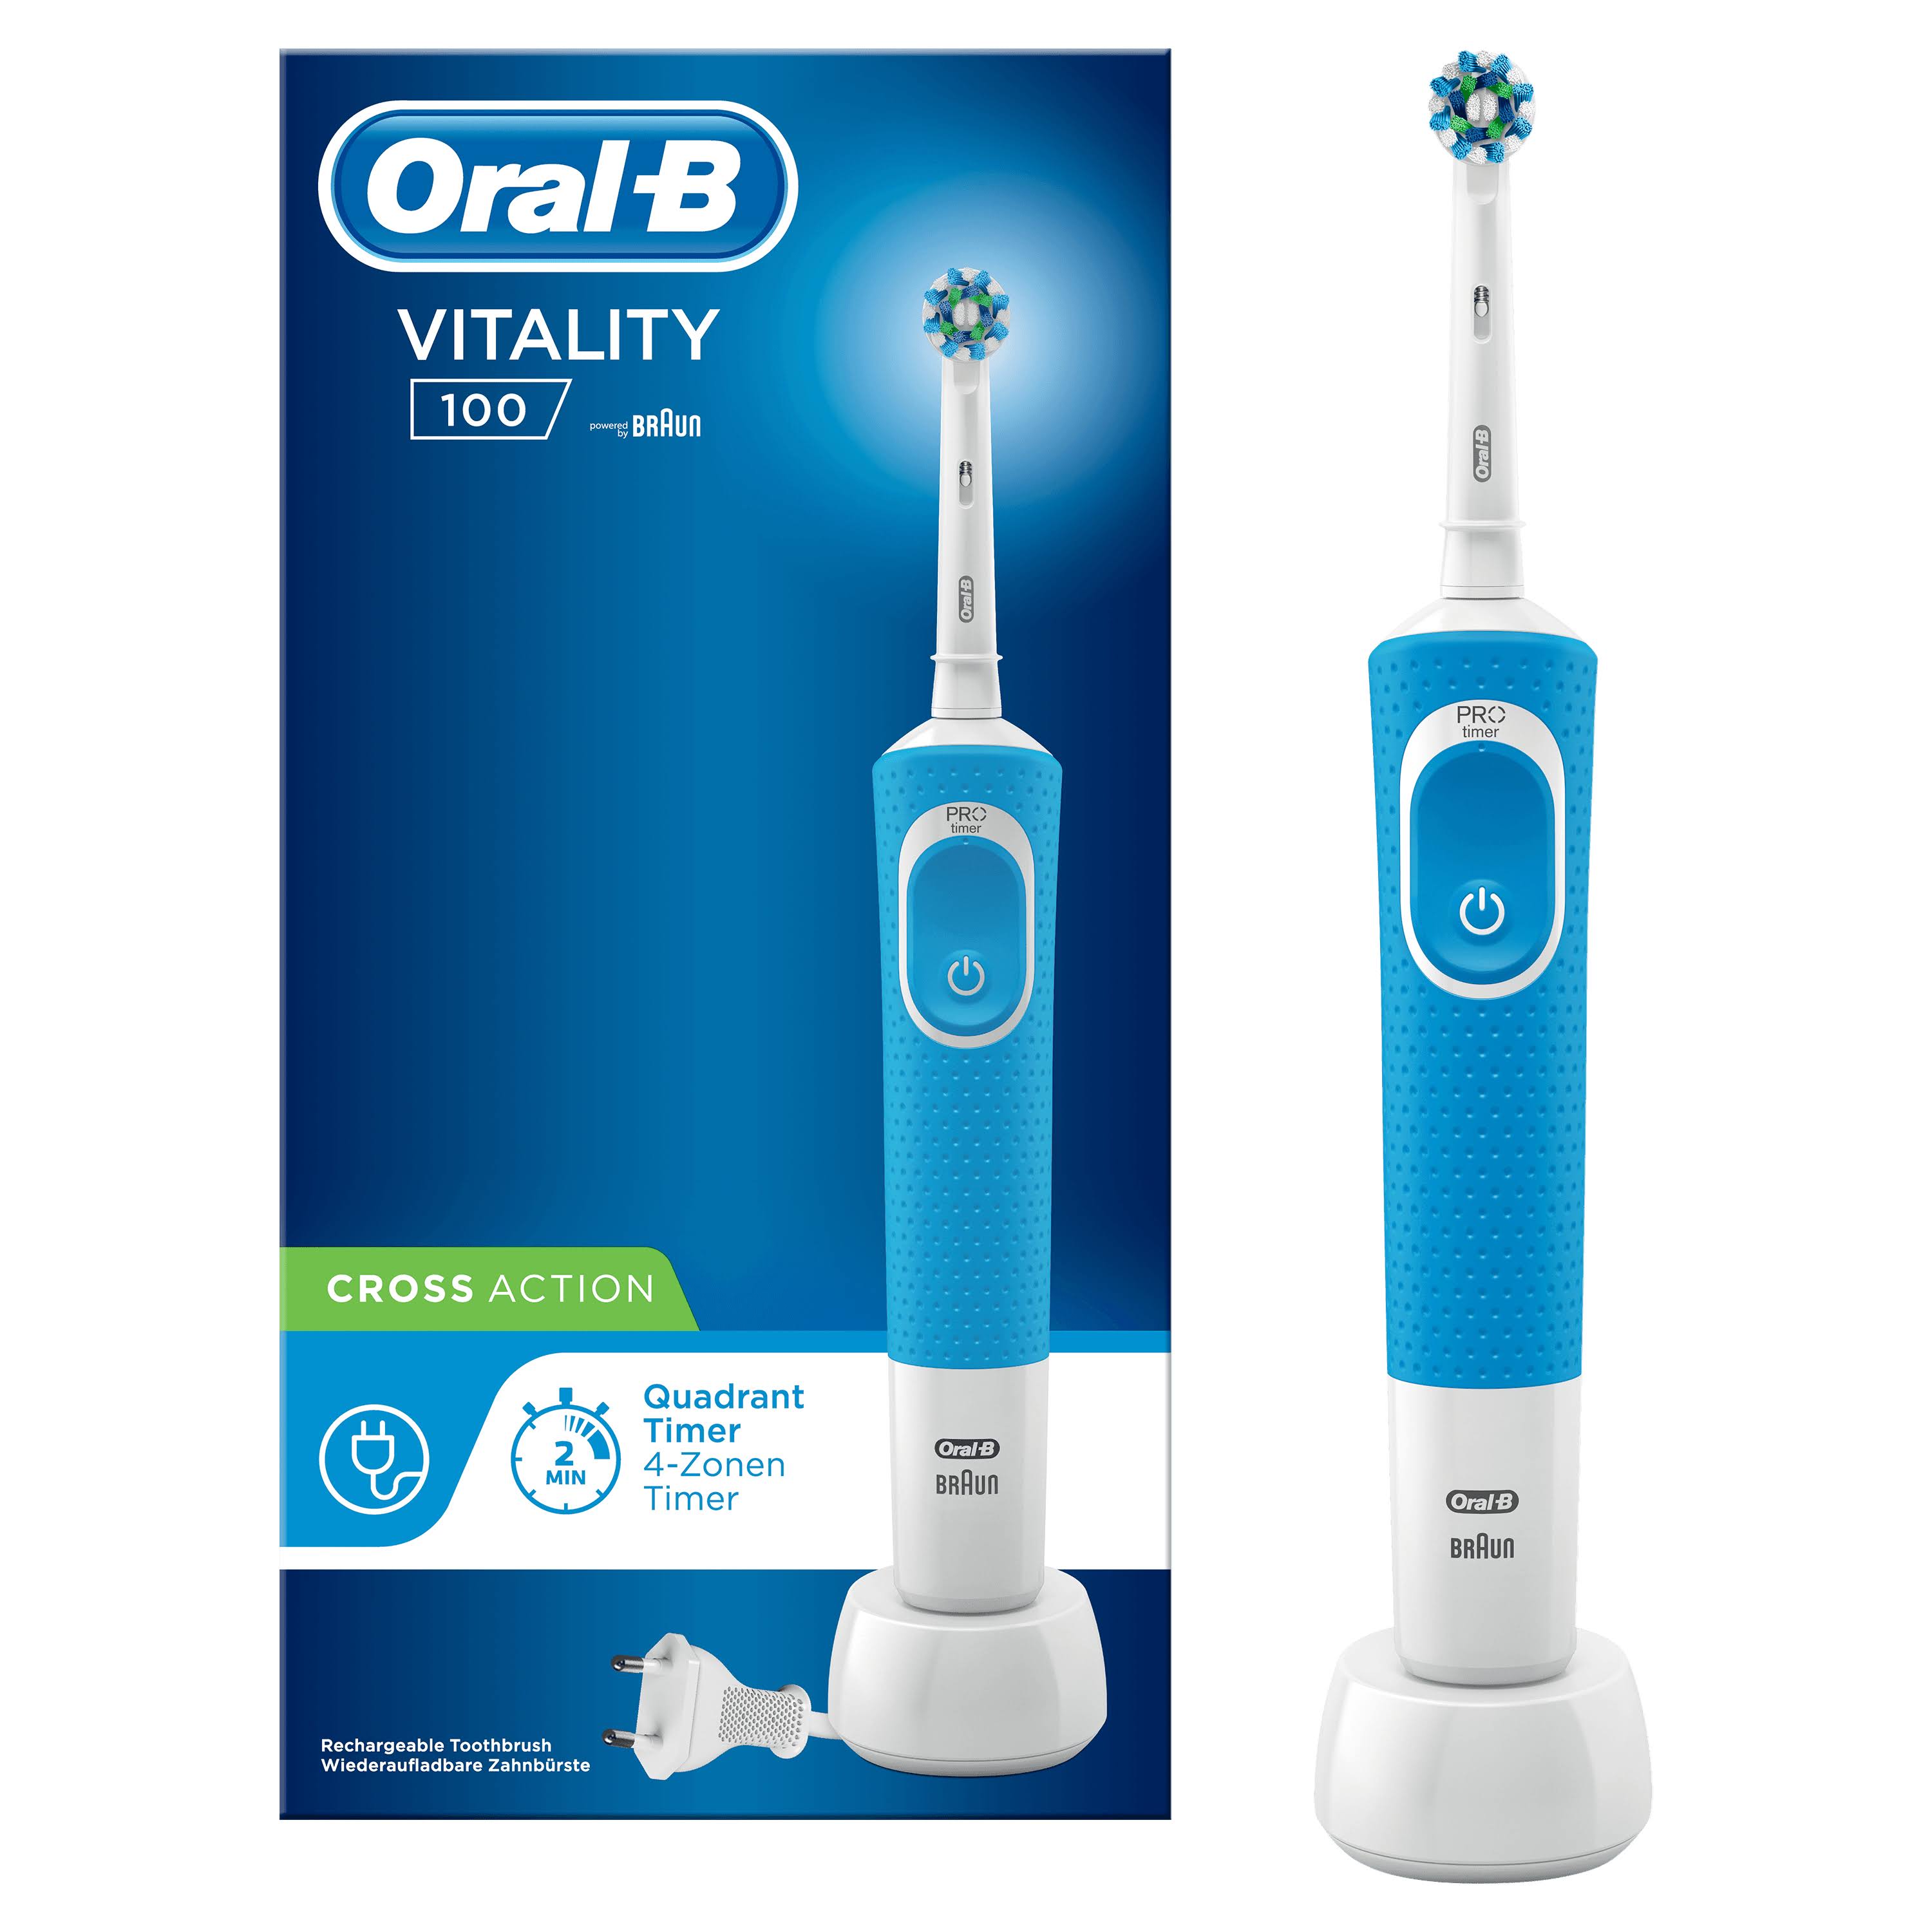 Oral-B Vitality 100 Blue Electric Toothbrush